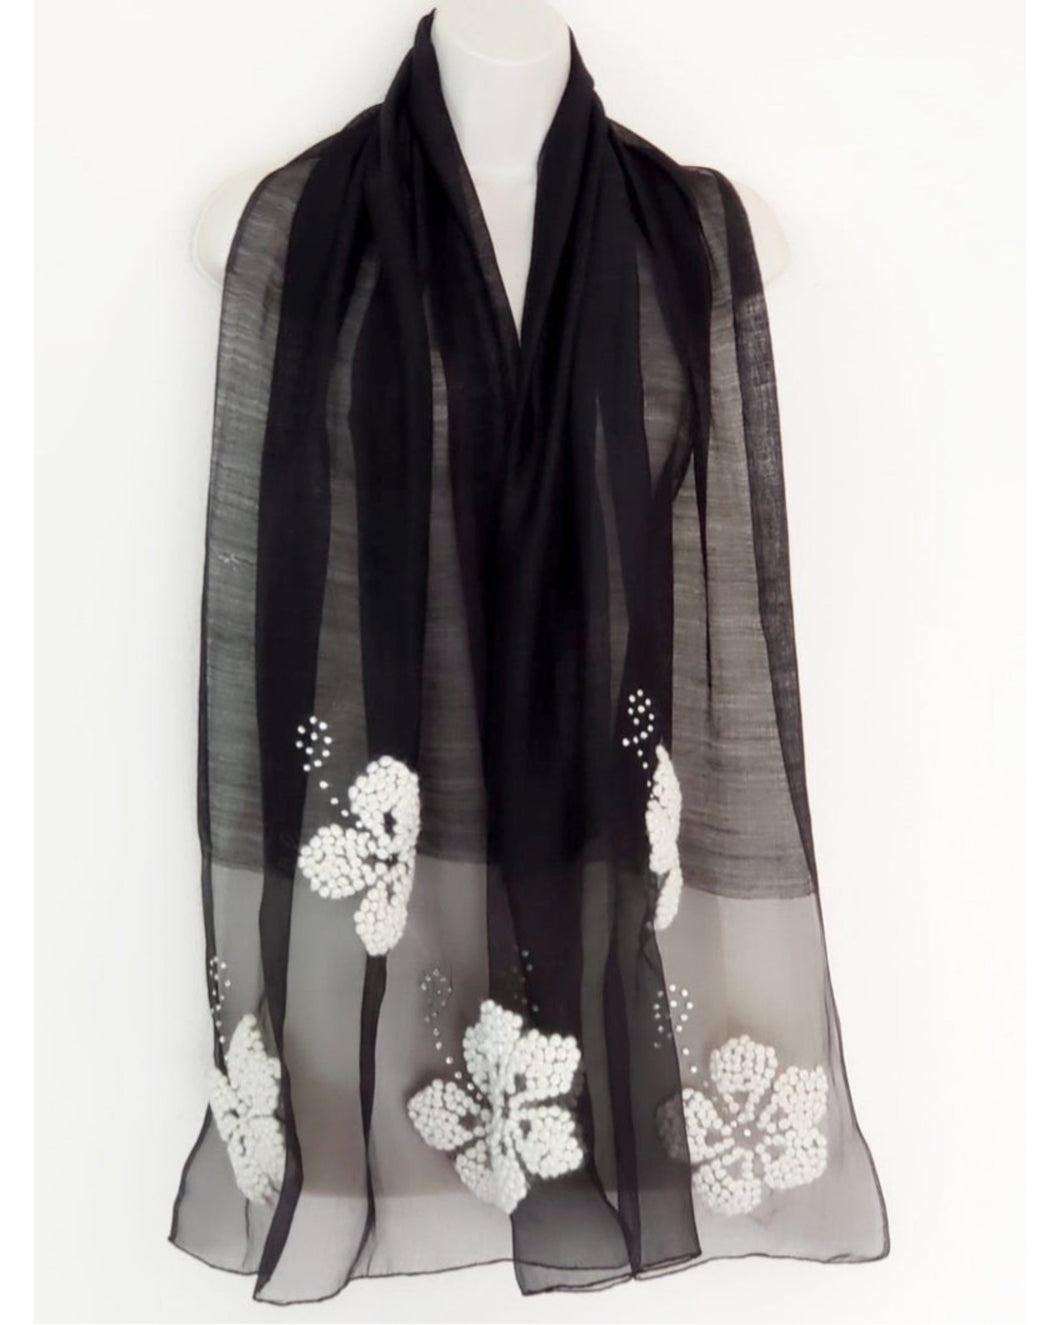 Hibiscus (Black with Ivory Flowers) Scarf